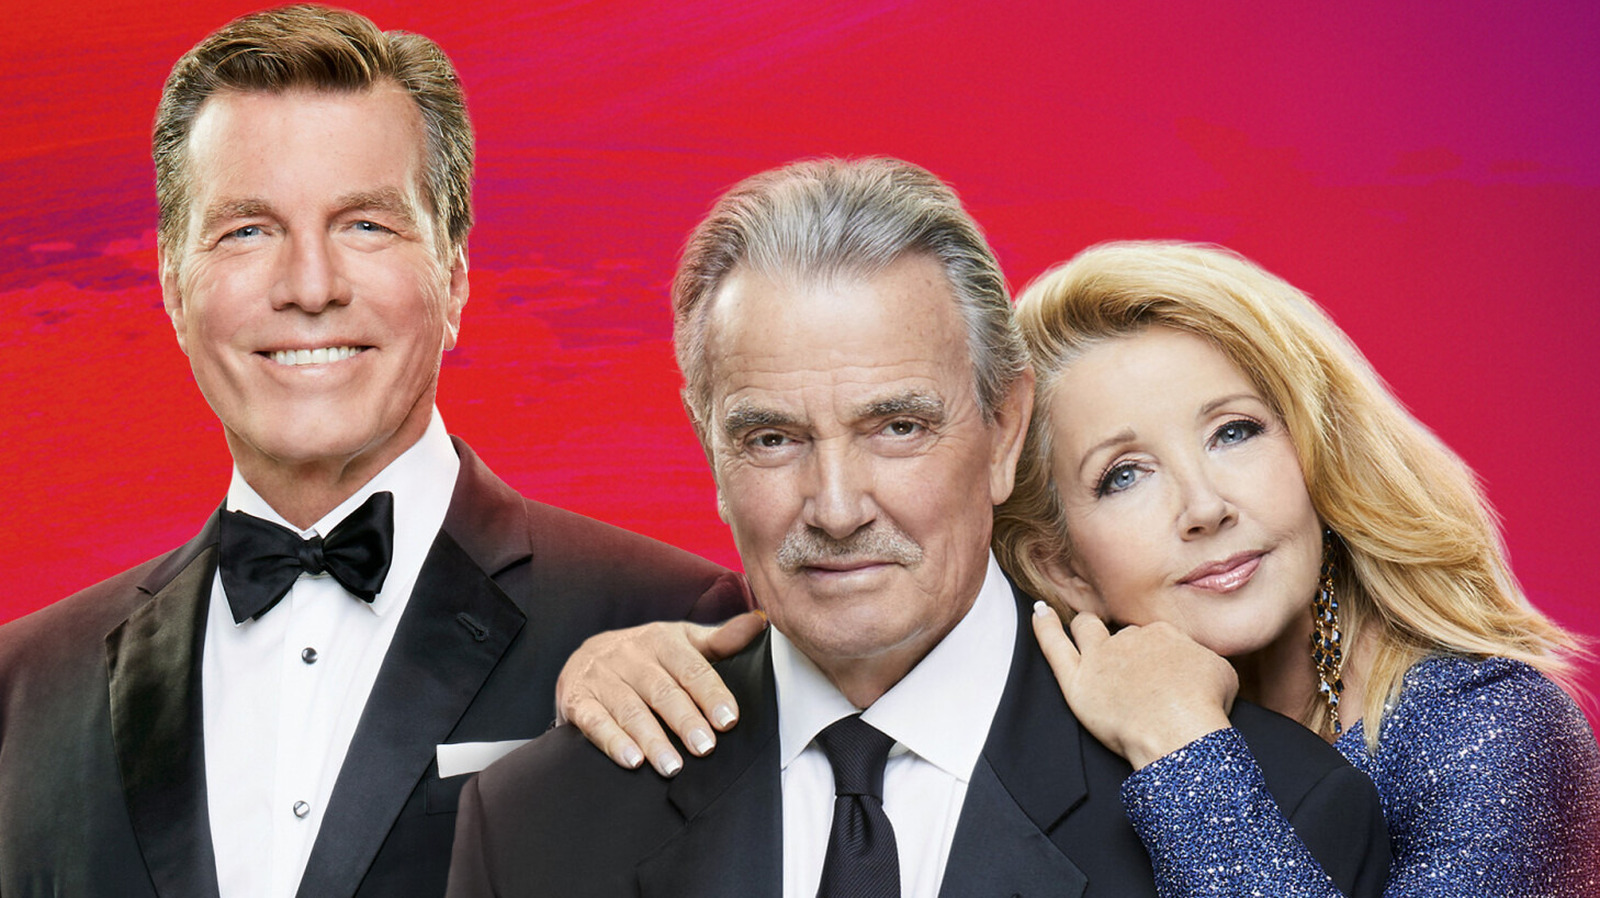 The Young And The Restless Makes A Big Change For Major Show Milestone